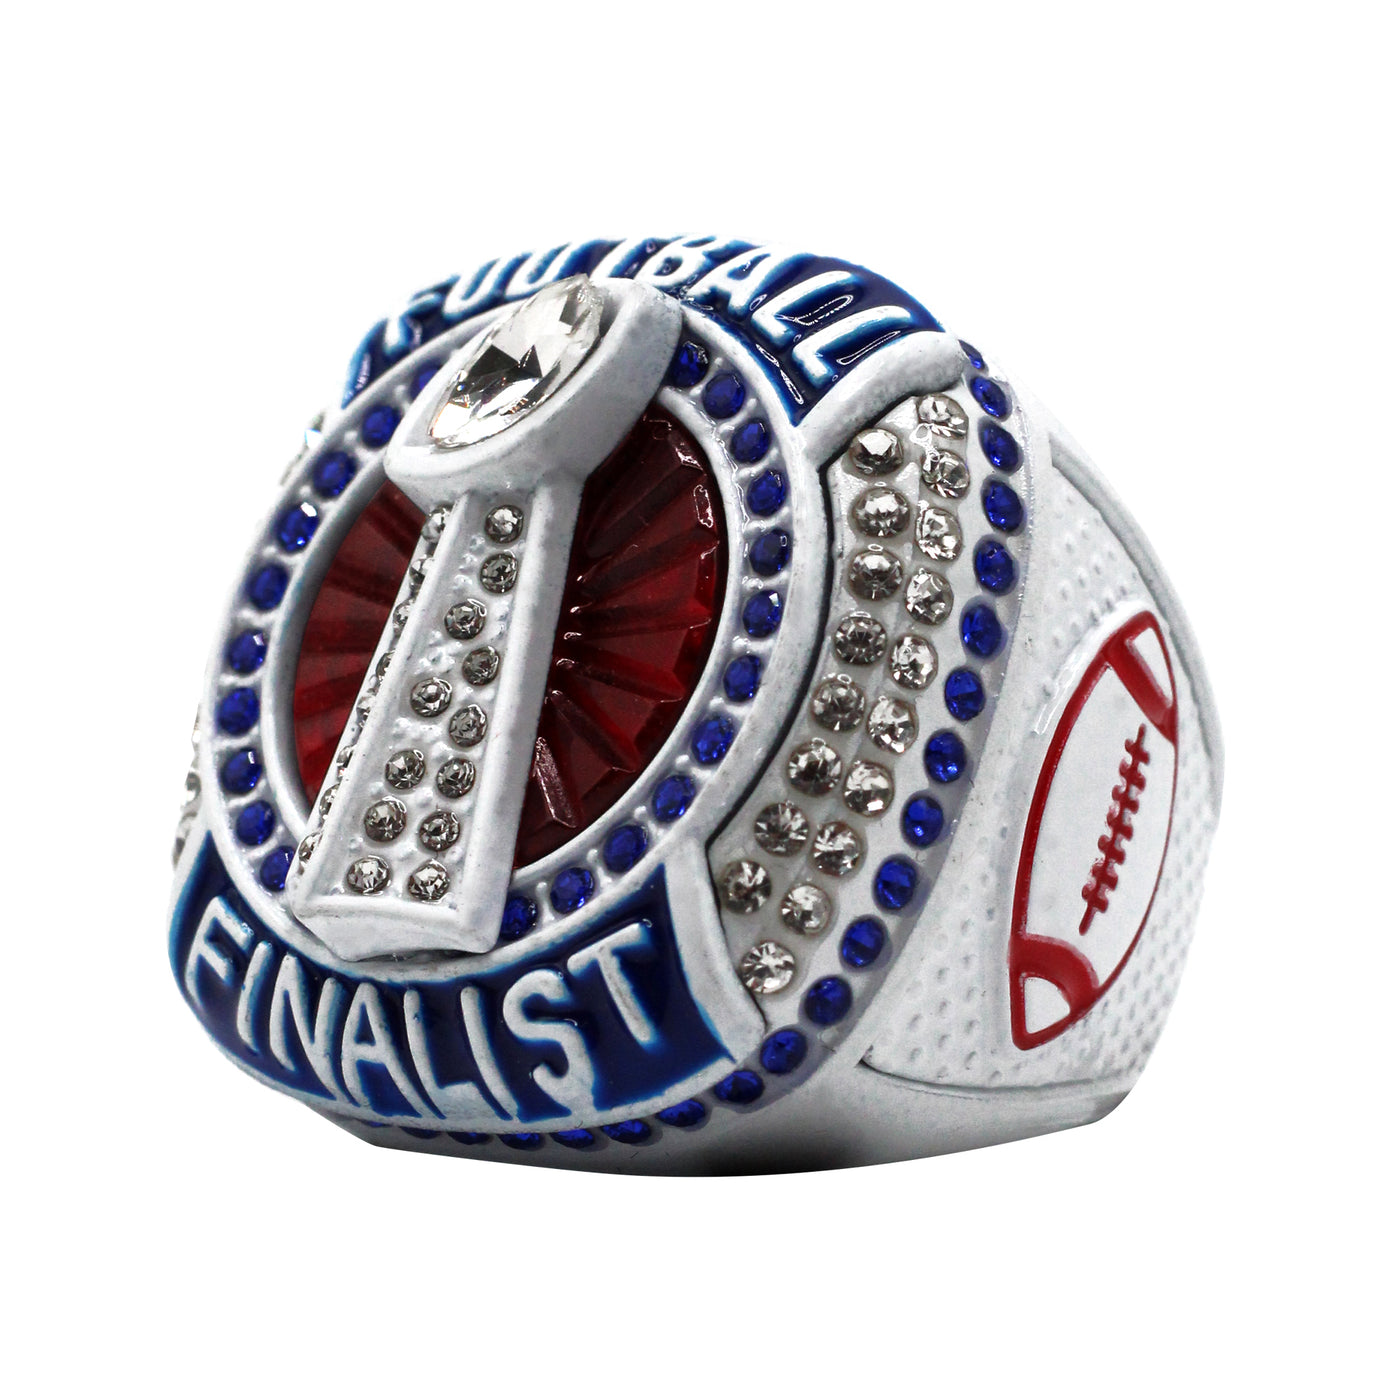 FOOTBALL1 WHITEOUT FINALIST RING